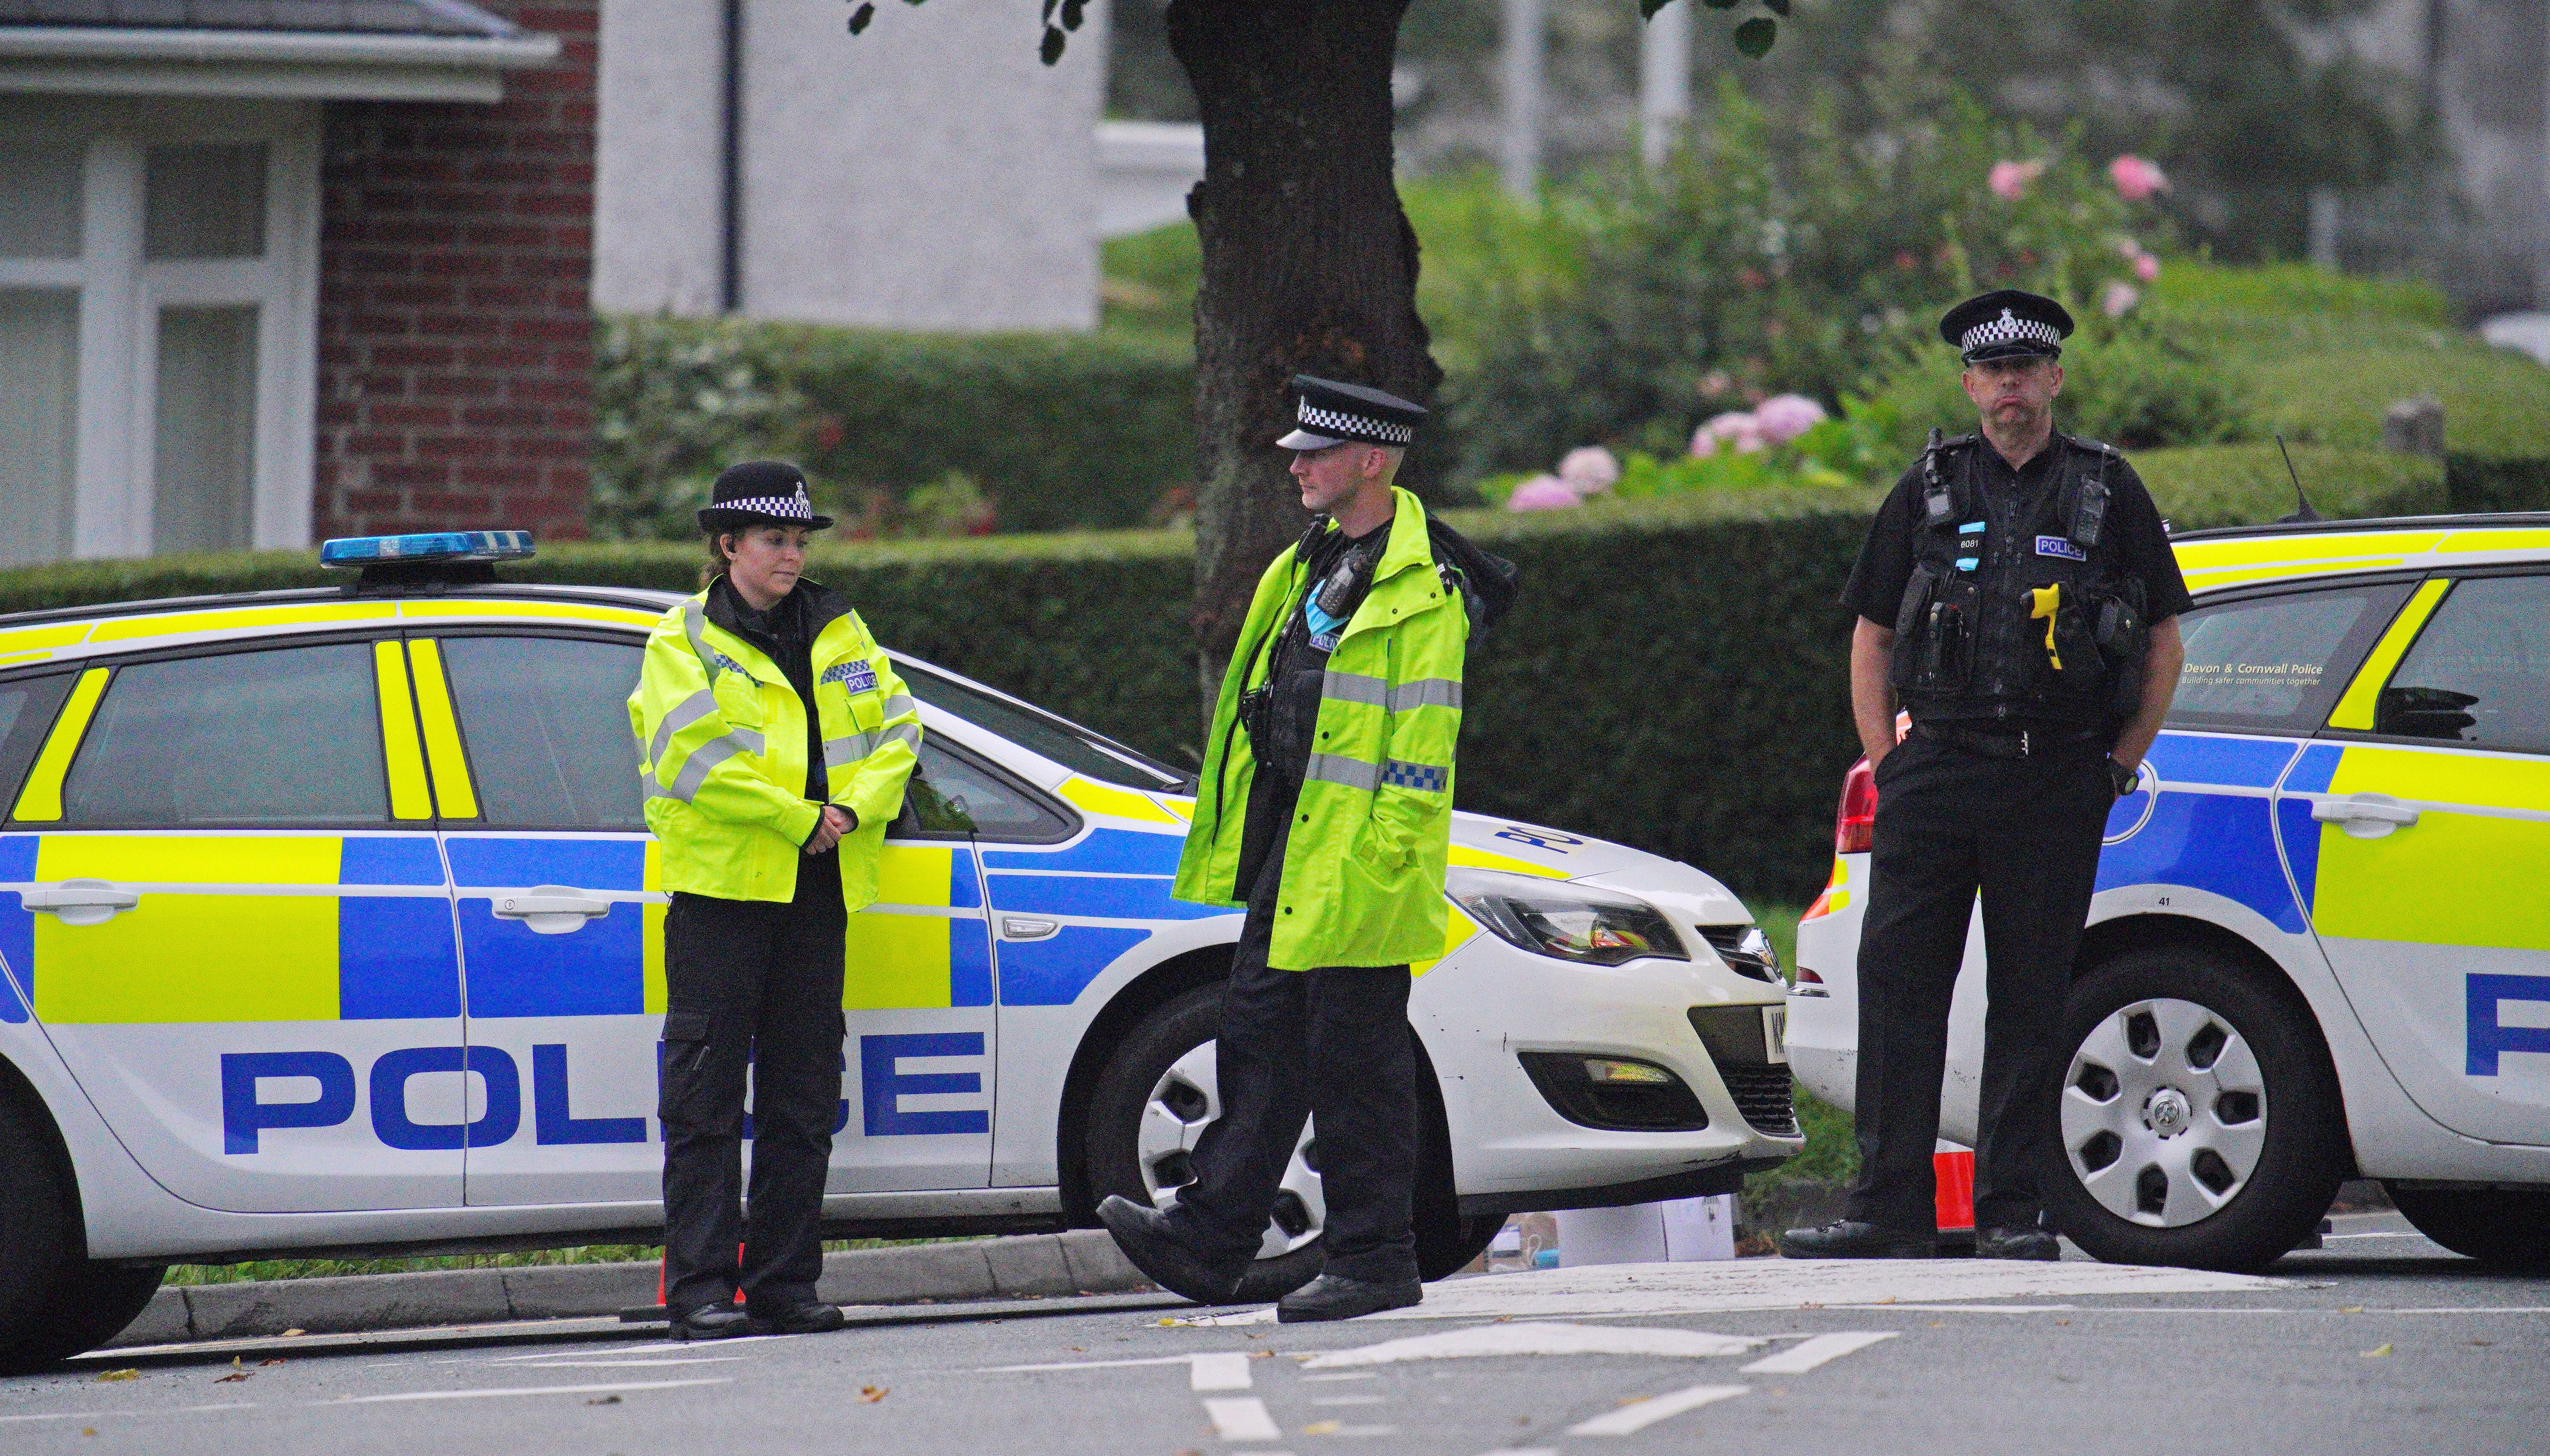 Police activity in the Keyham area of Plymouth where the shooting took place.